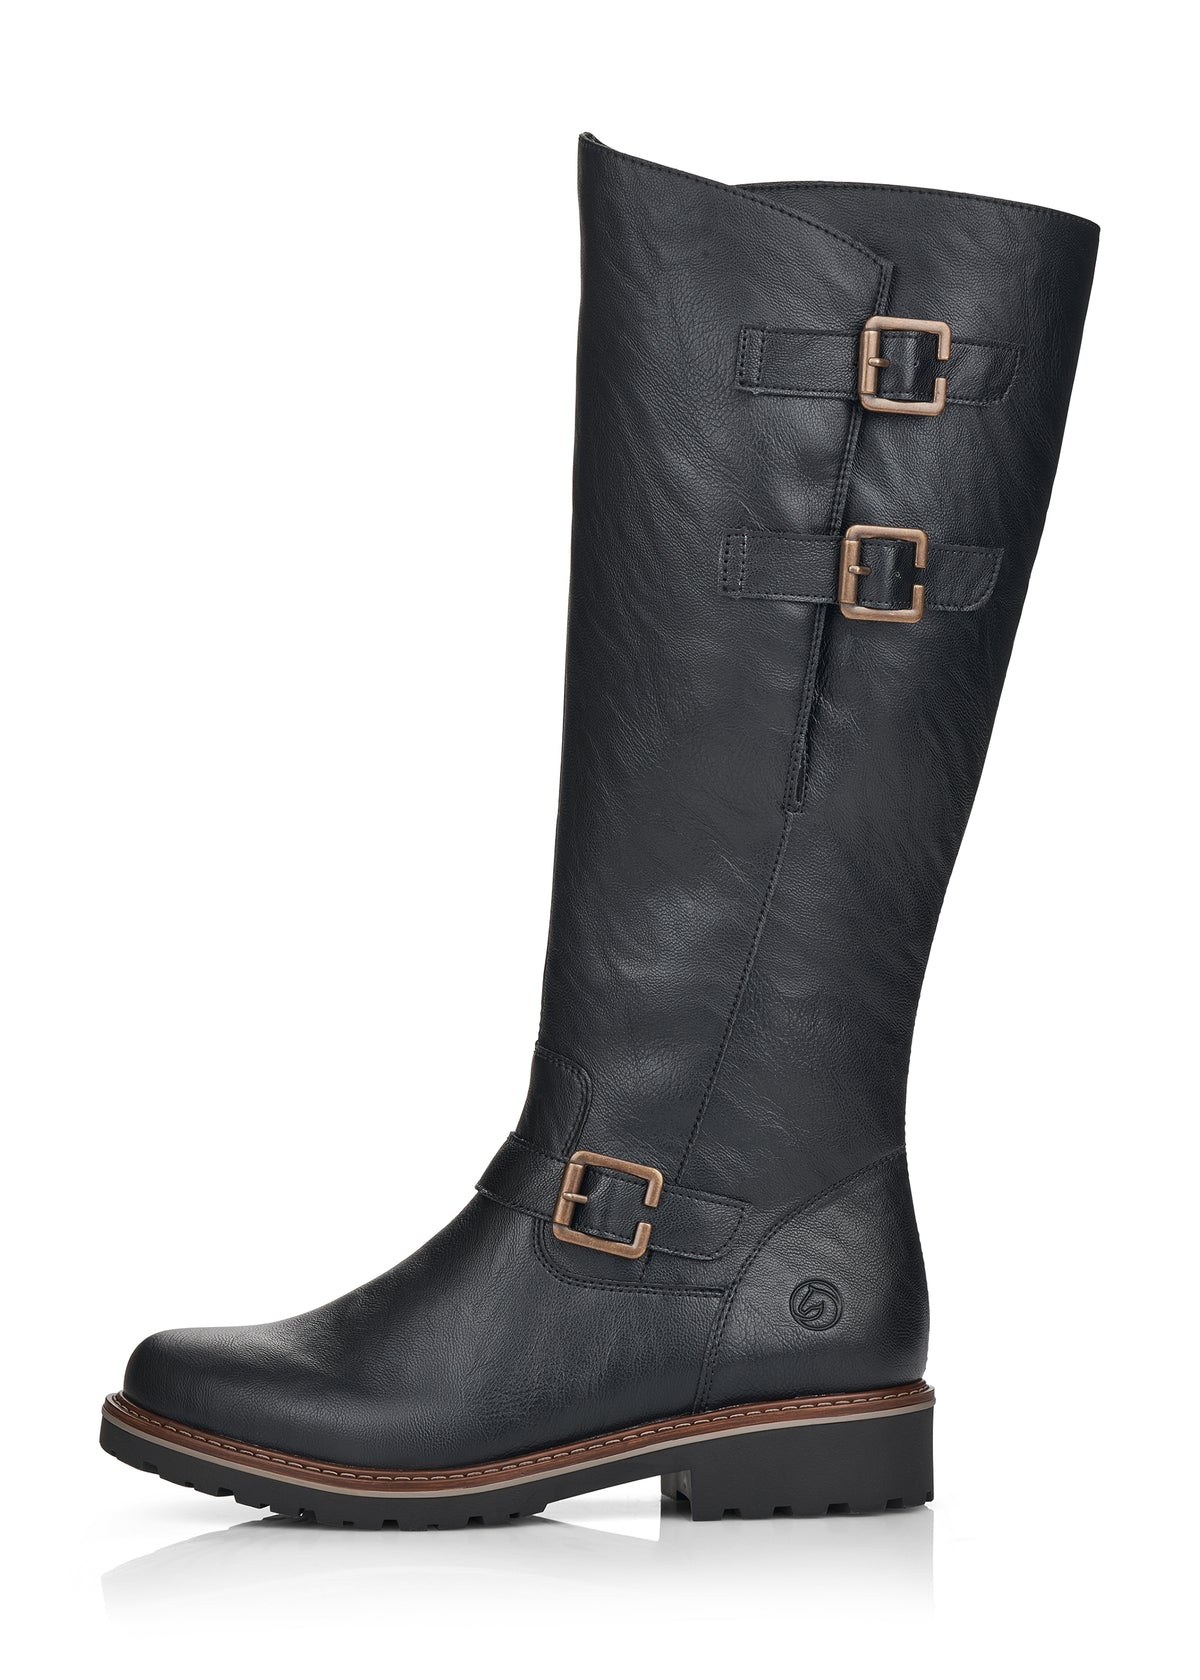 Boots with a warm lining - black, buckle decorations, L-XL shaft